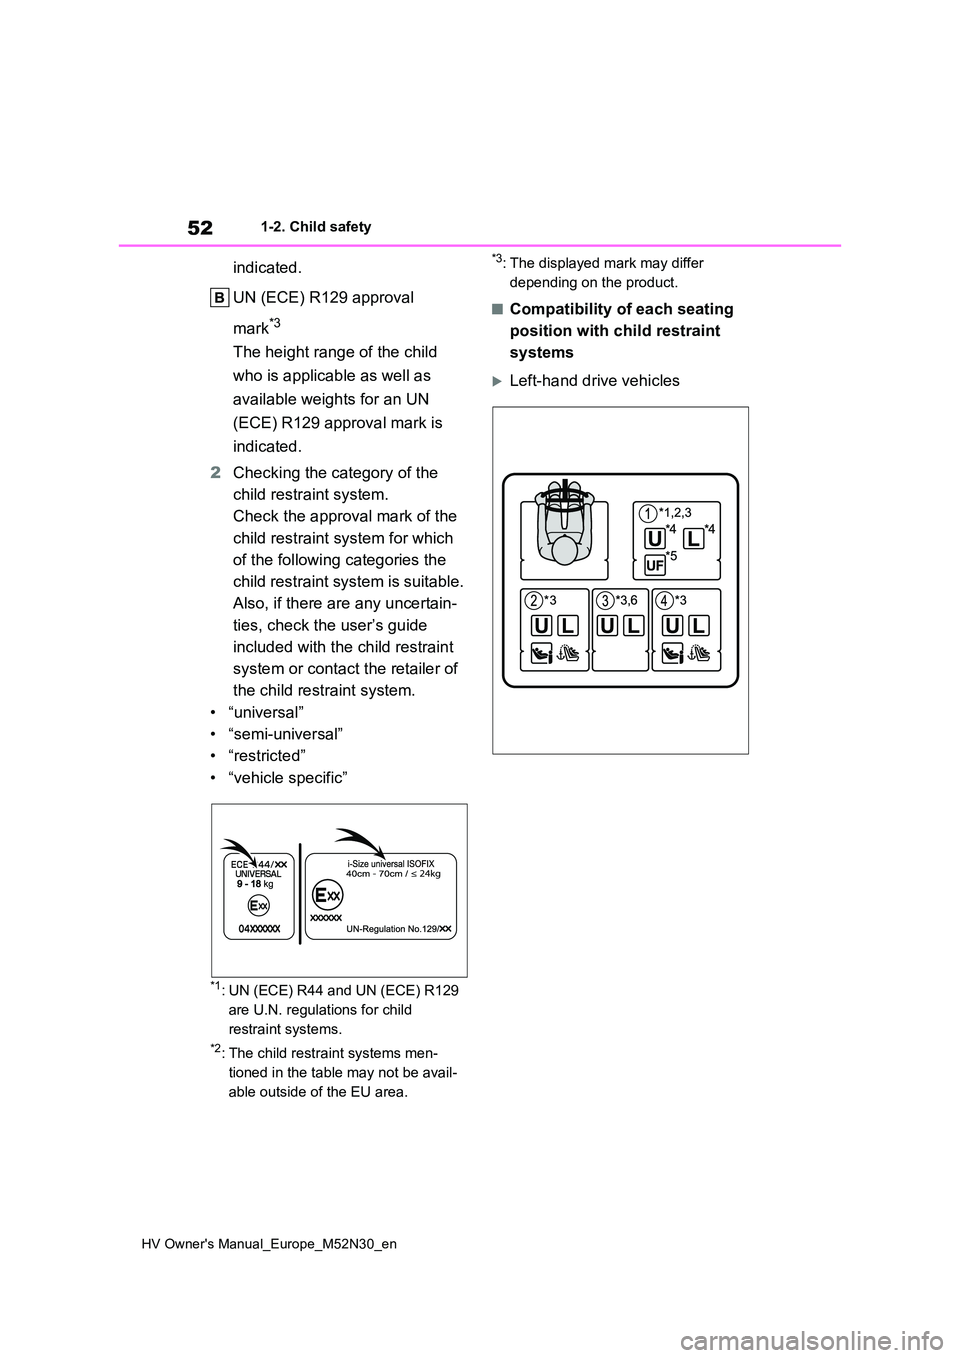 TOYOTA YARIS 2022 User Guide 52
HV Owner's Manual_Europe_M52N30_en
1-2. Child safety
indicated. 
UN (ECE) R129 approval  
mark*3
The height range of the child  
who is applicable as well as 
available weights for an UN  
(ECE